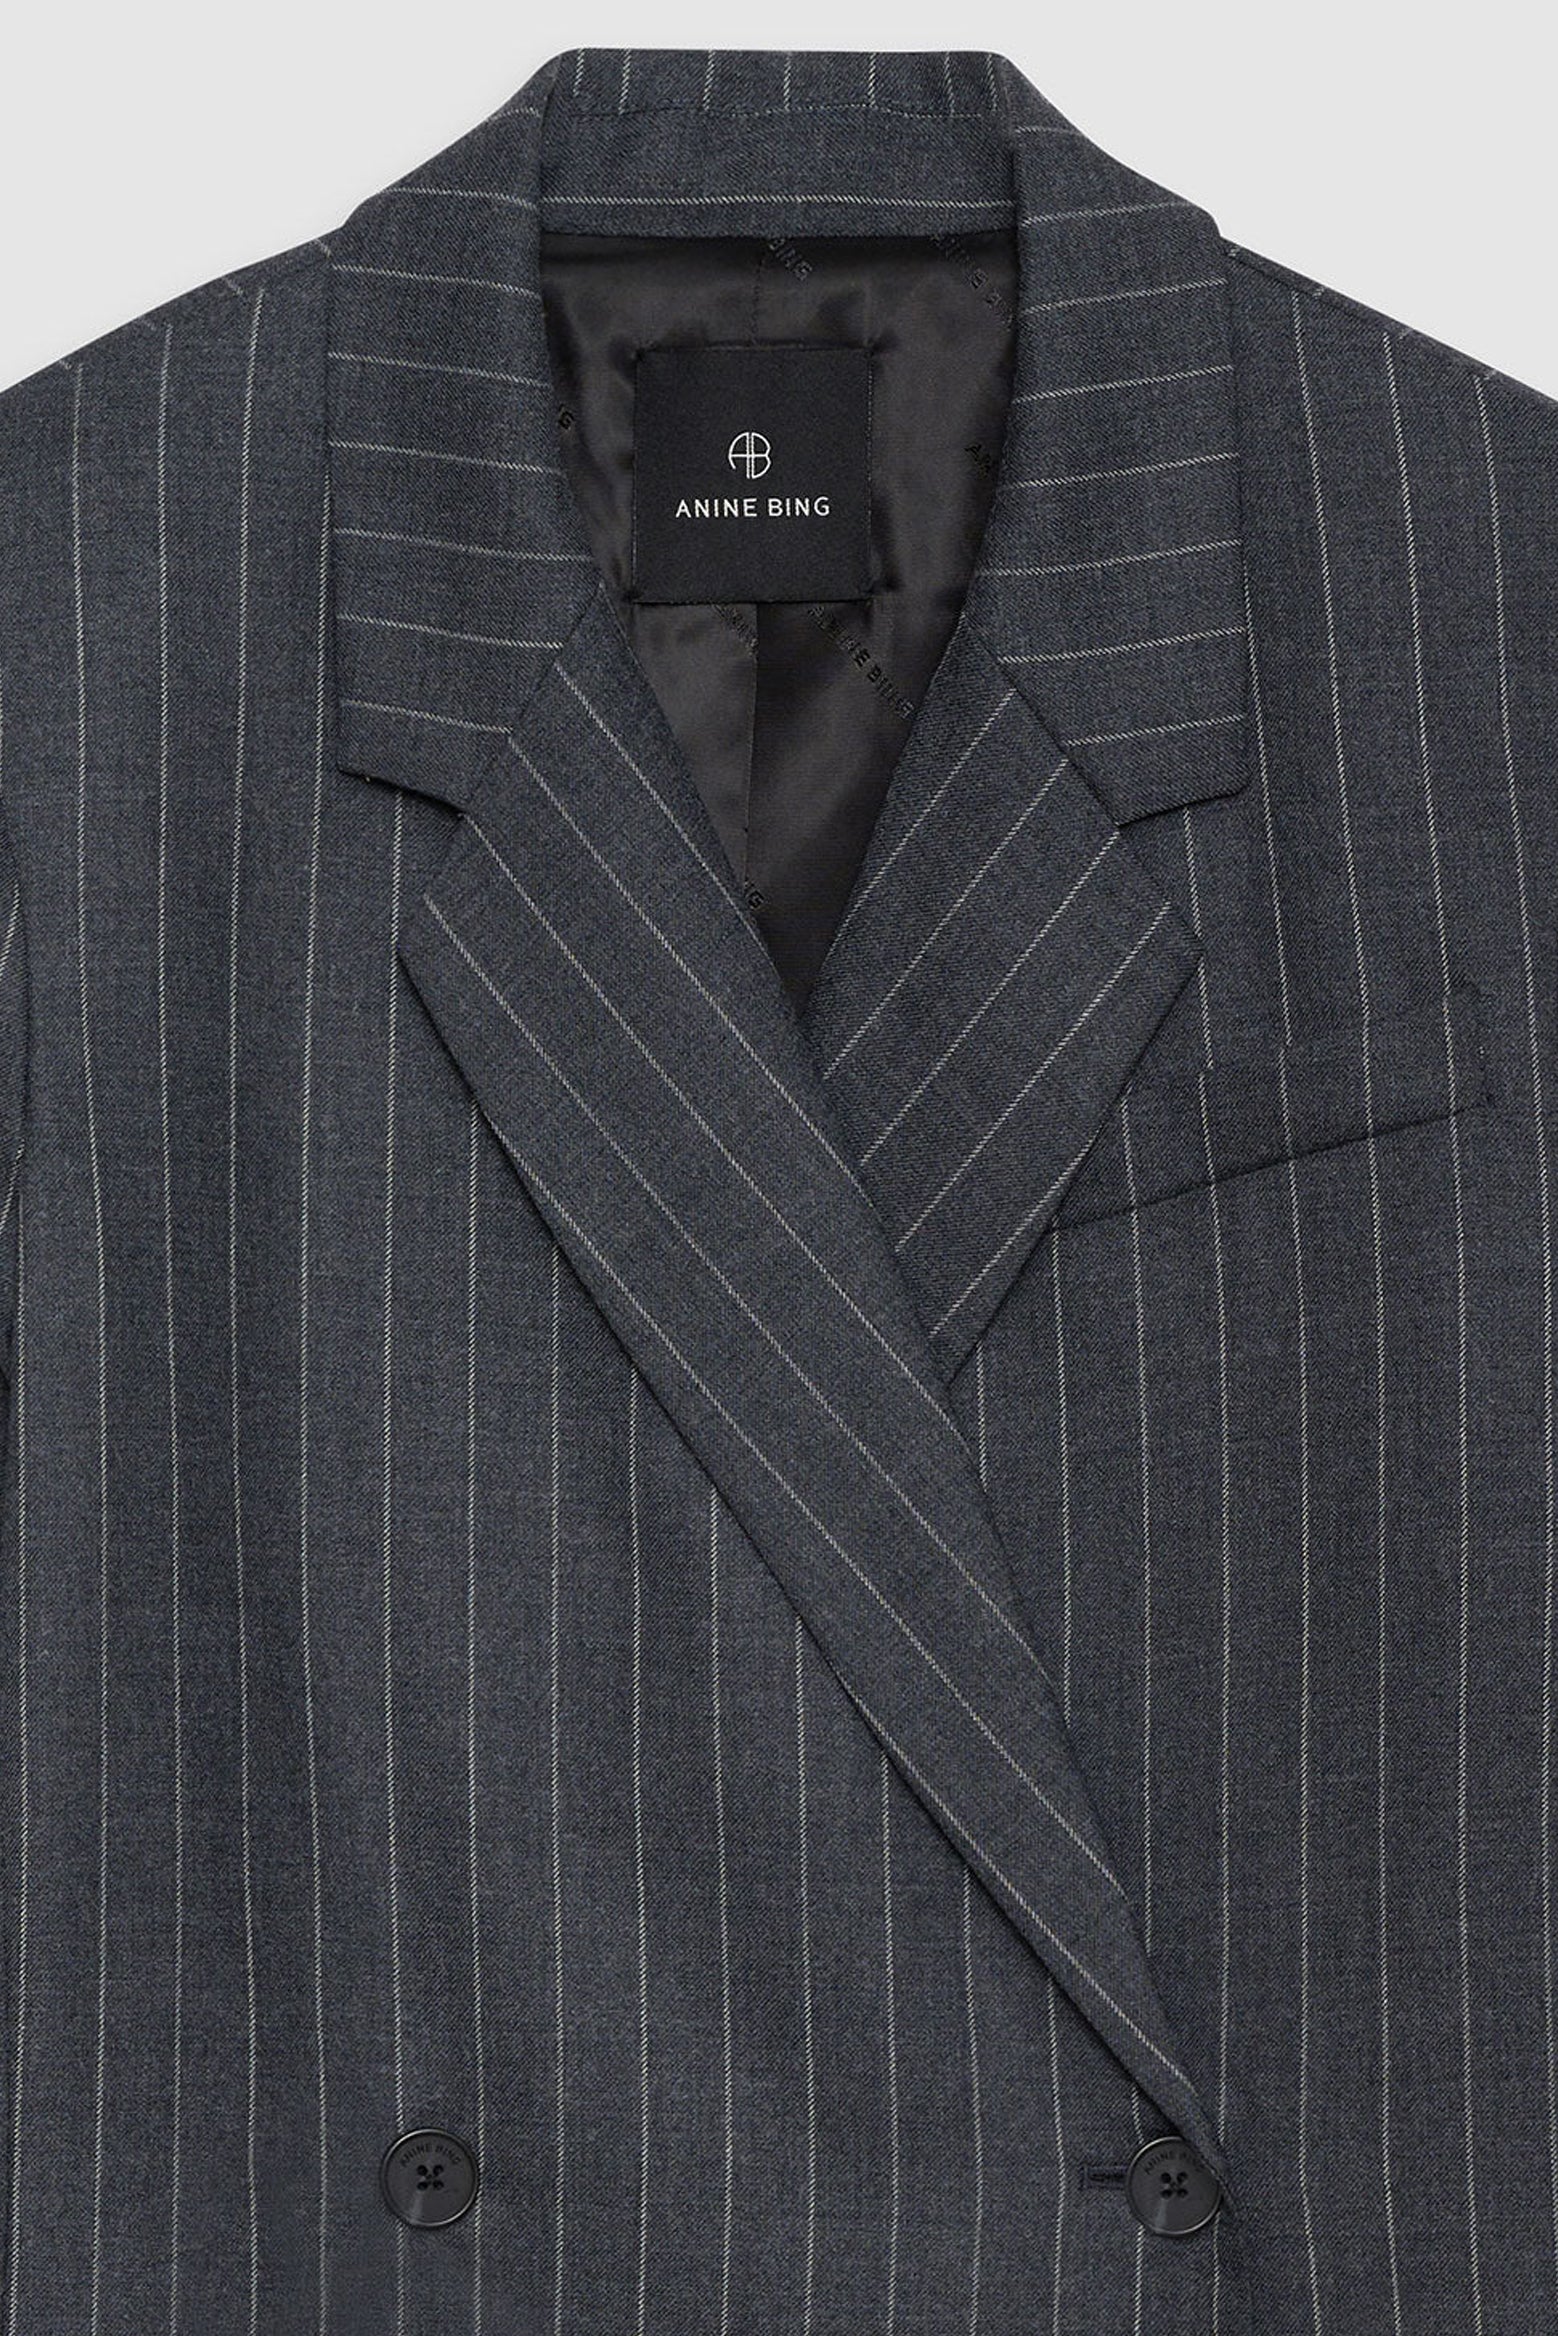 Anine Bing Kaia Blazer in Grey Pinstripe available at The New Trend Australia.